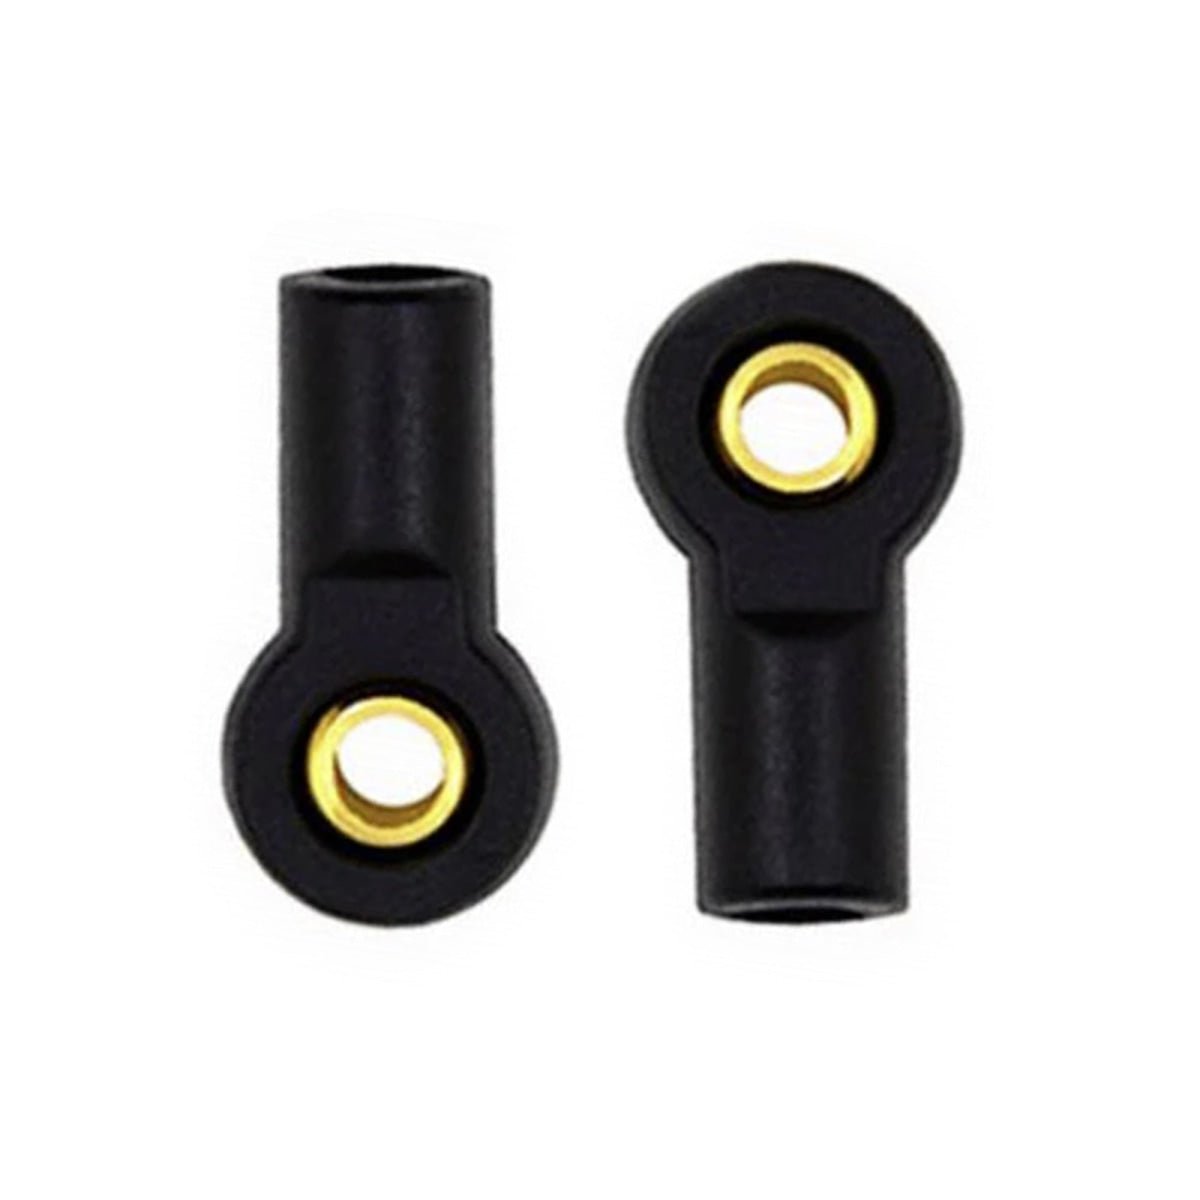 2/10x M3 Ball Head Plastic Link End Holder Tie Rod End Hole For RC Car Buggy Crawler Car 18mm - 2pcs - Asia Sell